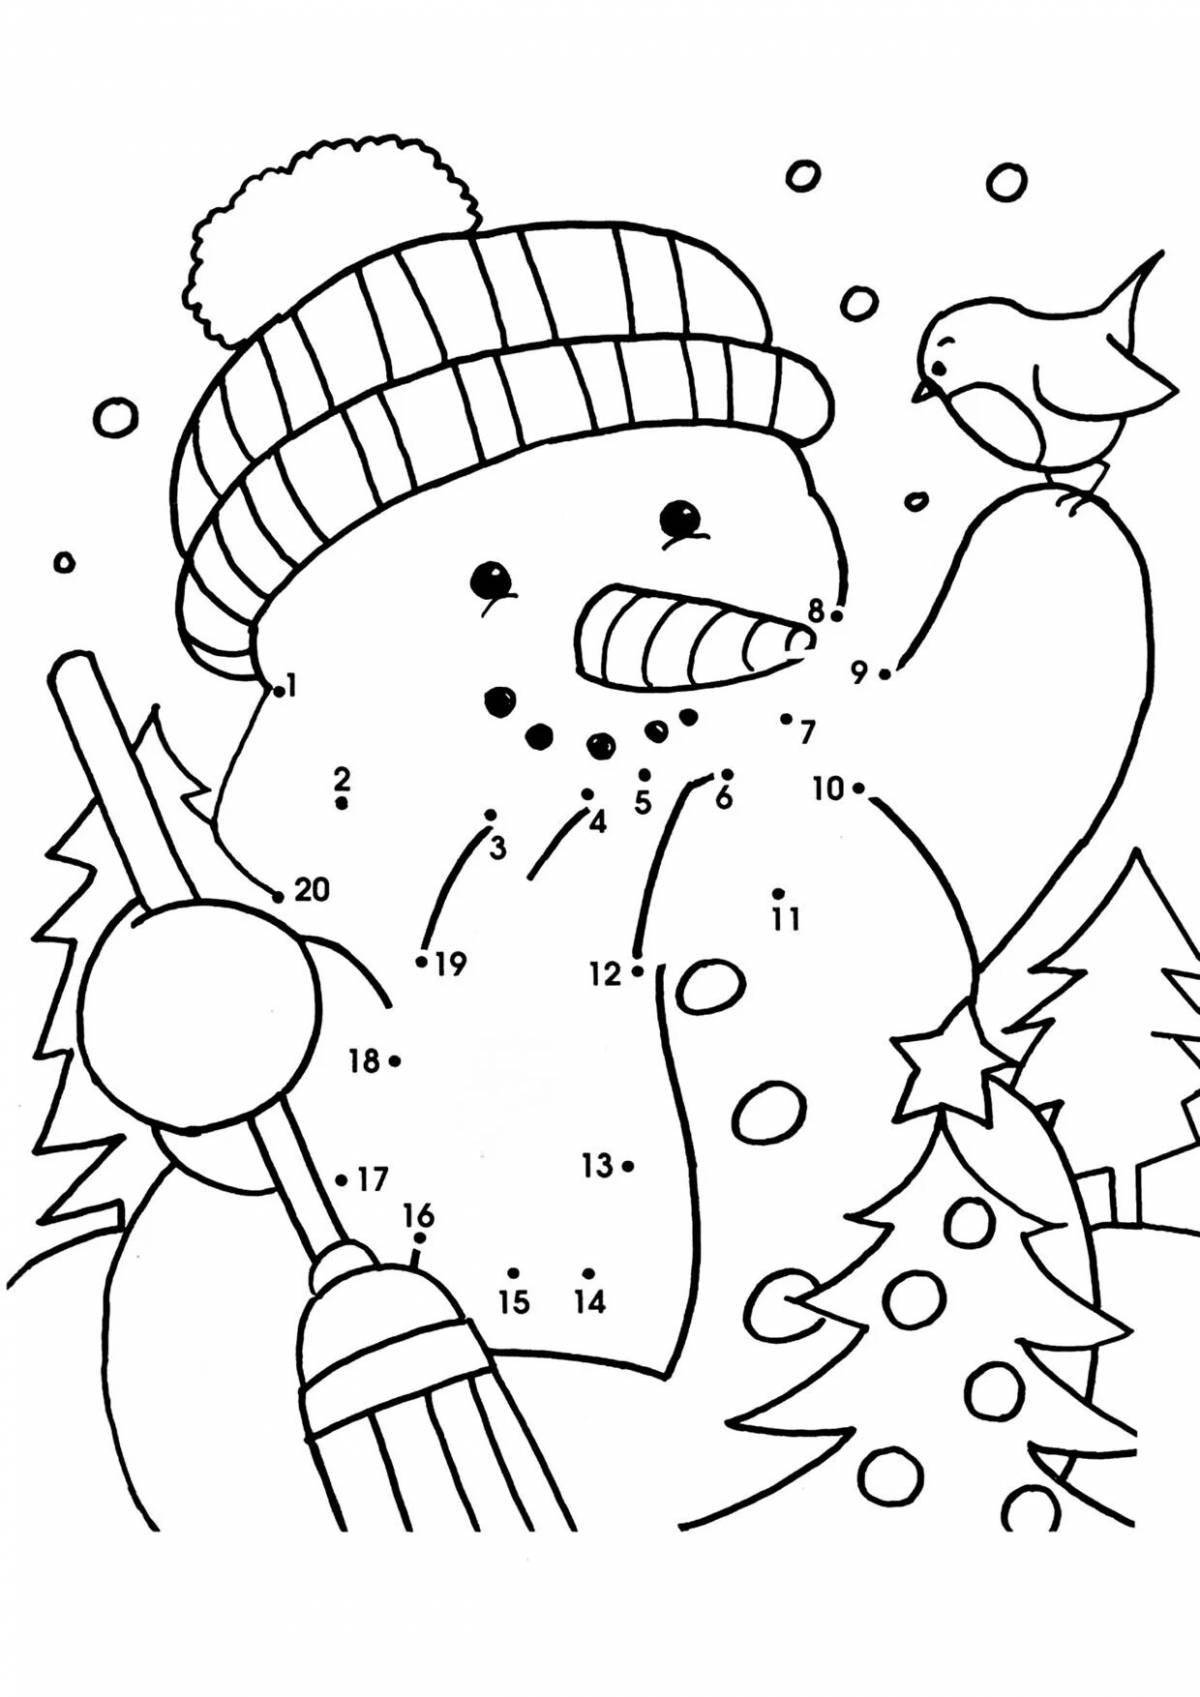 Colorful winter by numbers coloring book